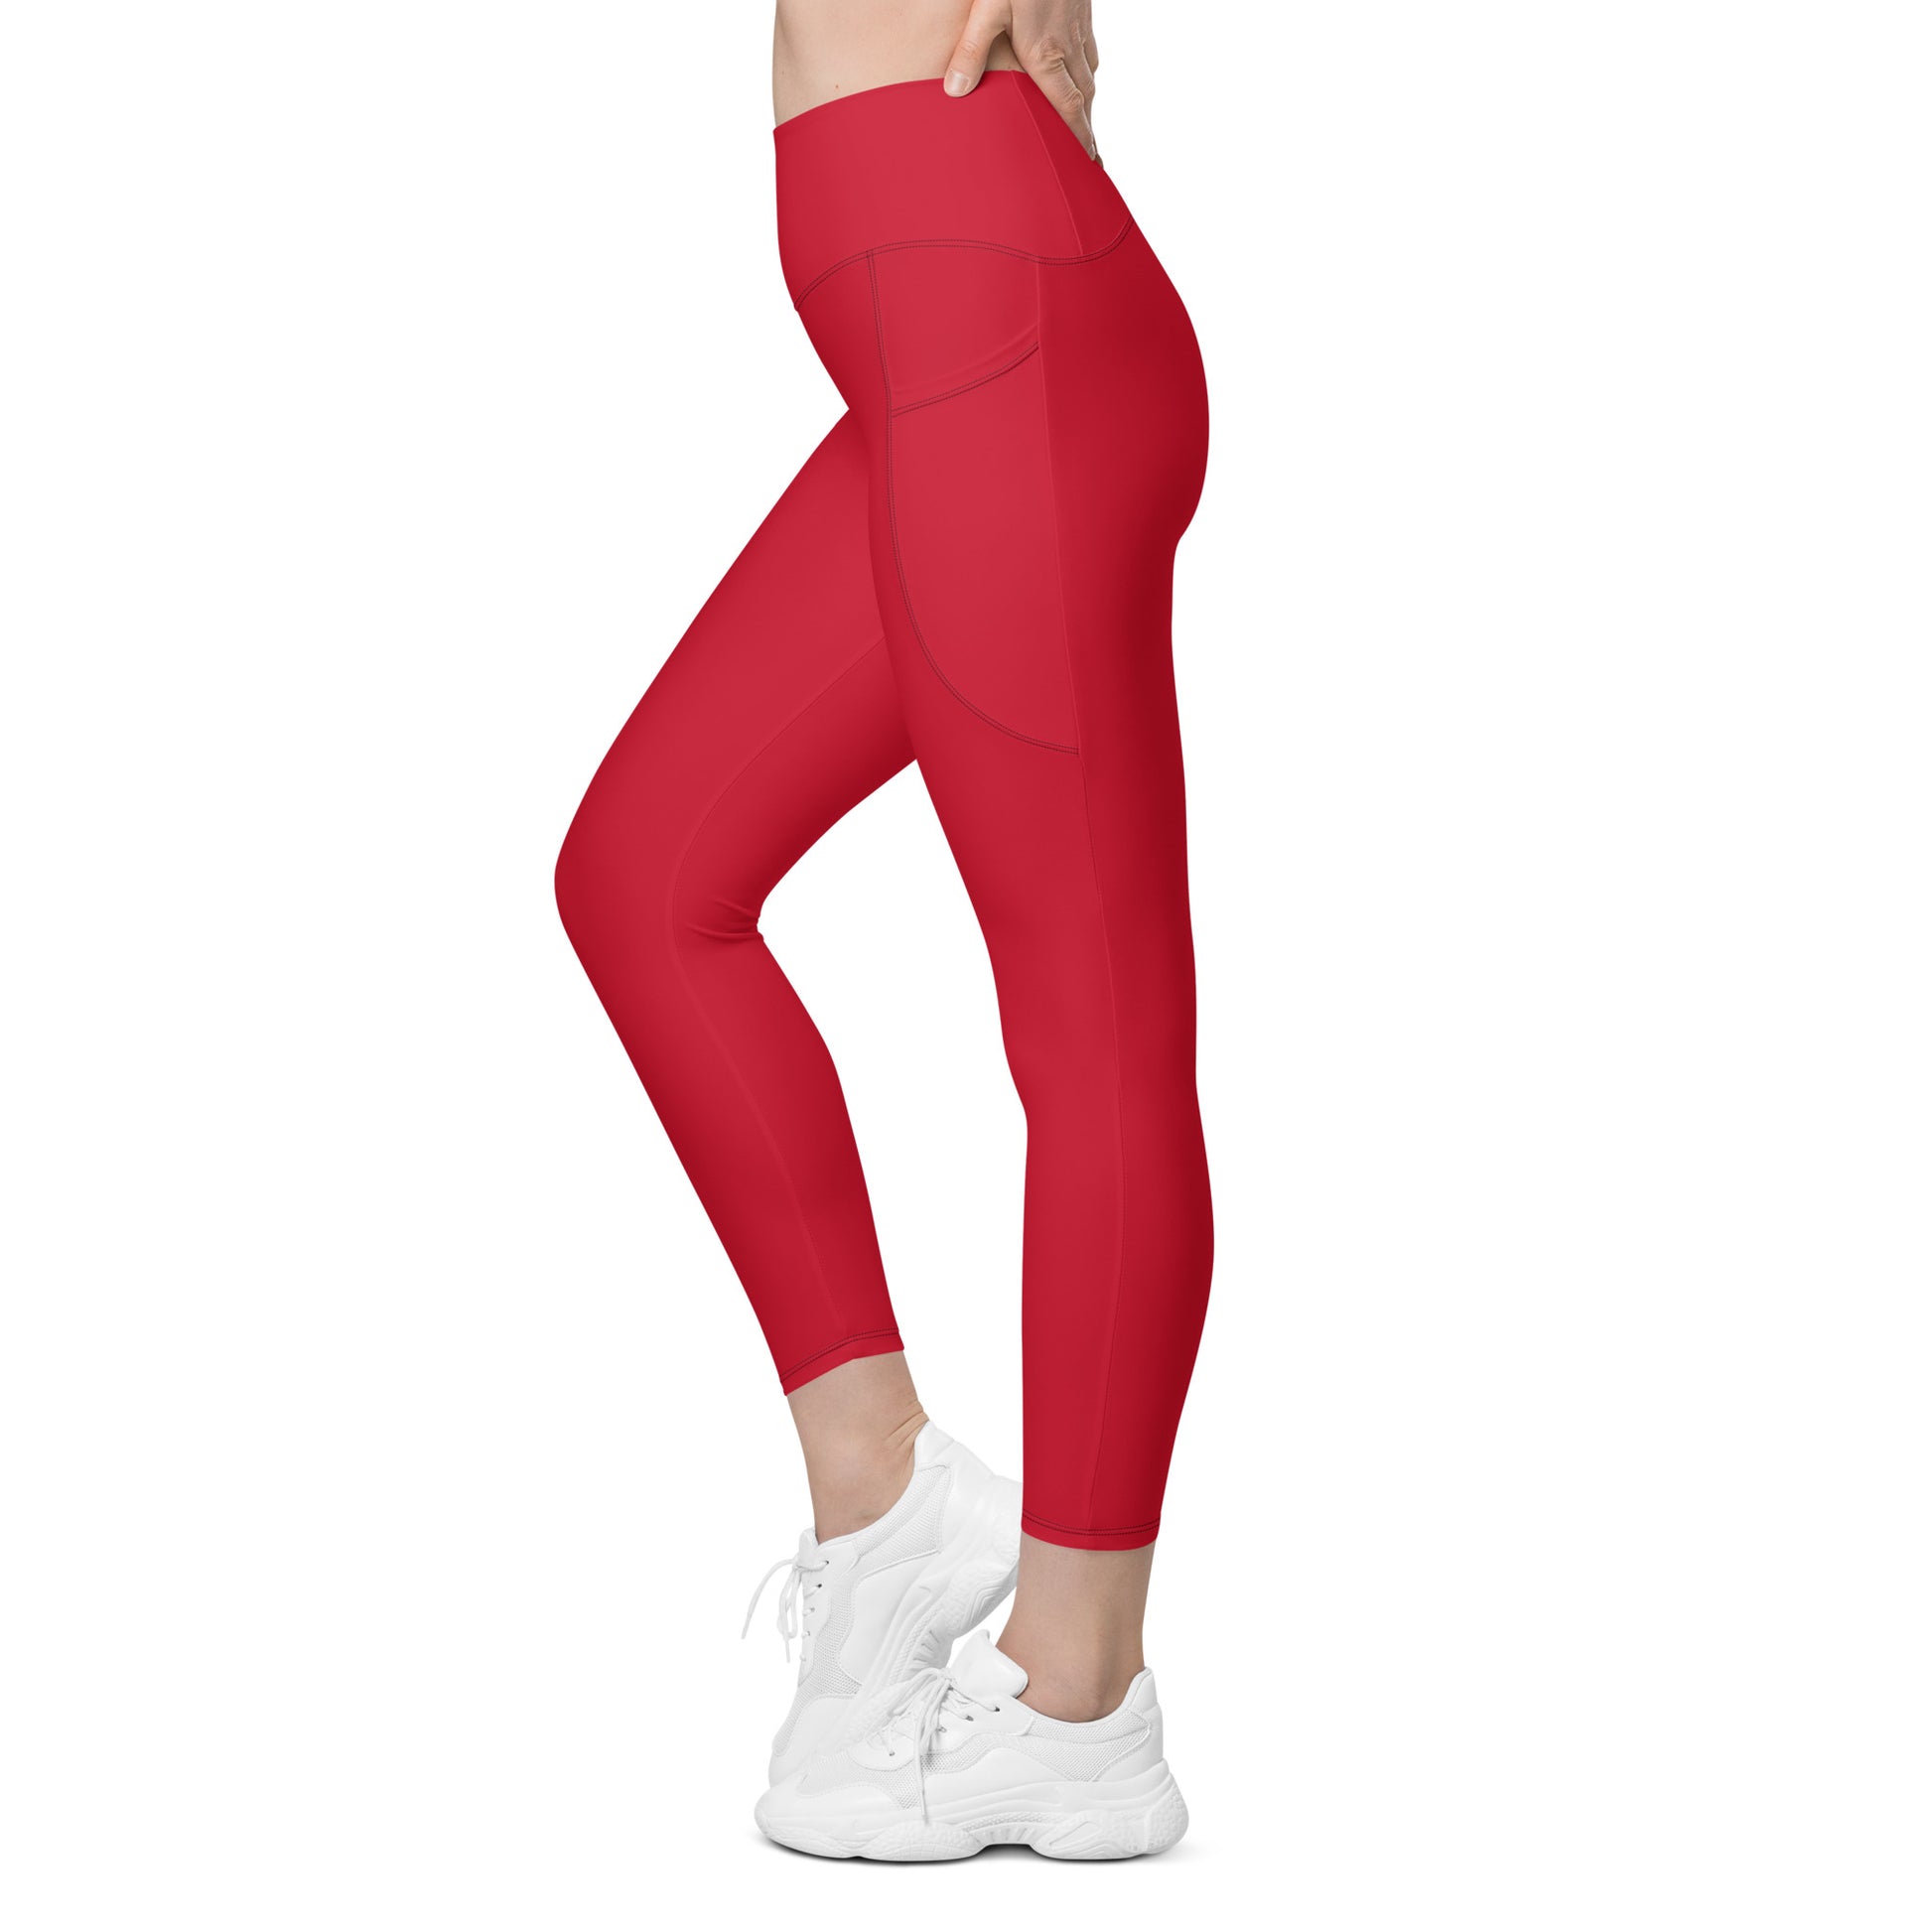 Red Leggings With Pockets